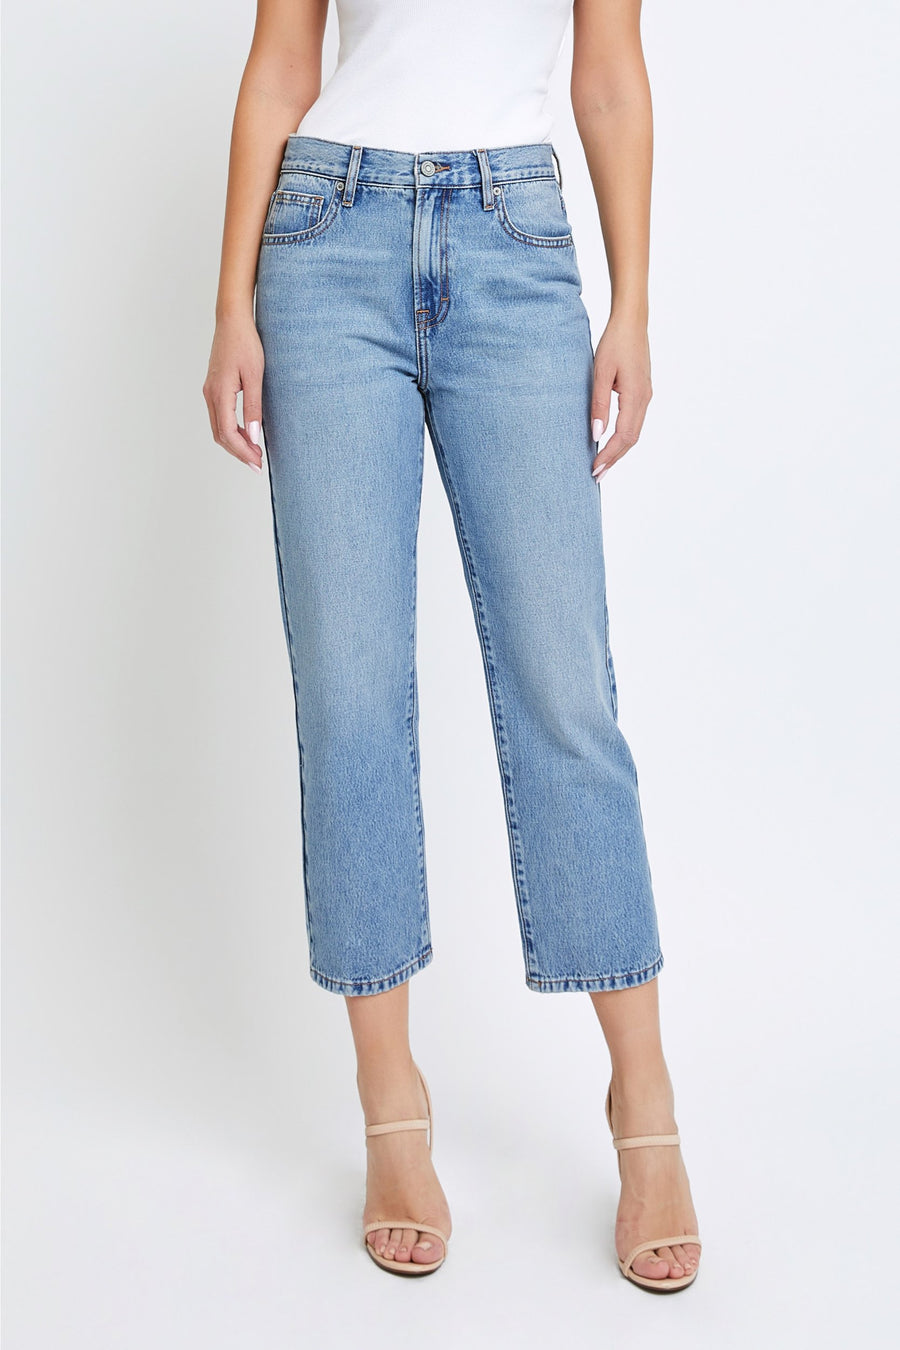 [TRACEY] MEDIUM WASH CLASSIC 25" INSEAM RELAXED STRAIGHT